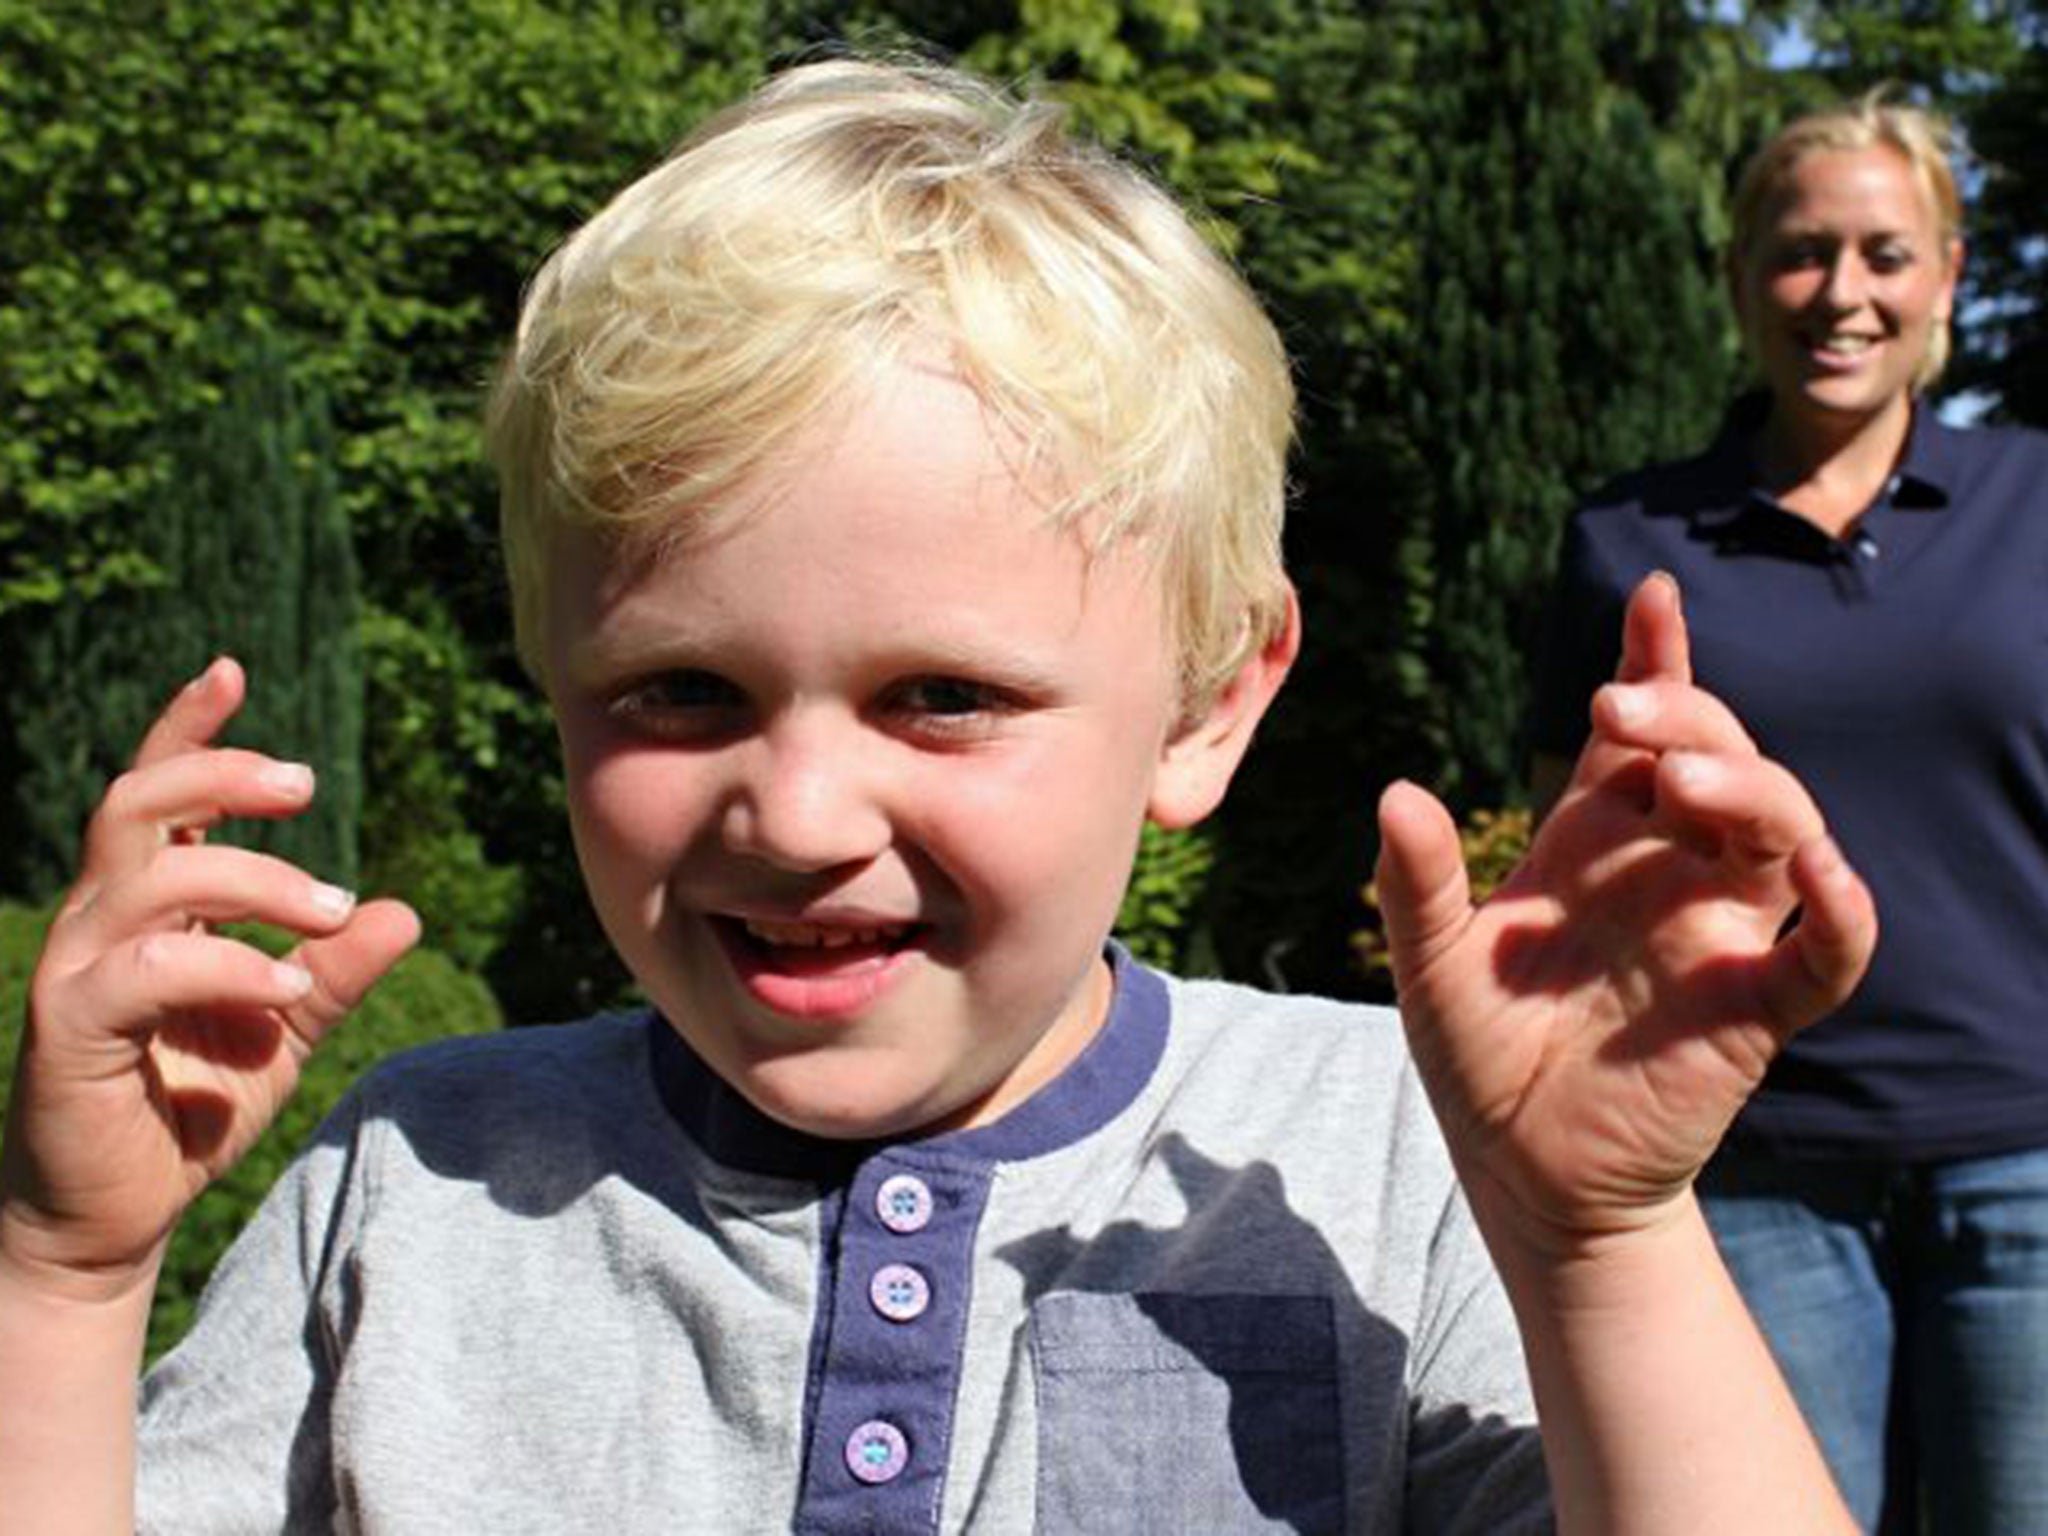 Spoilt or sick? Six-year-old Theo was a master of how to make a nuisance of himself